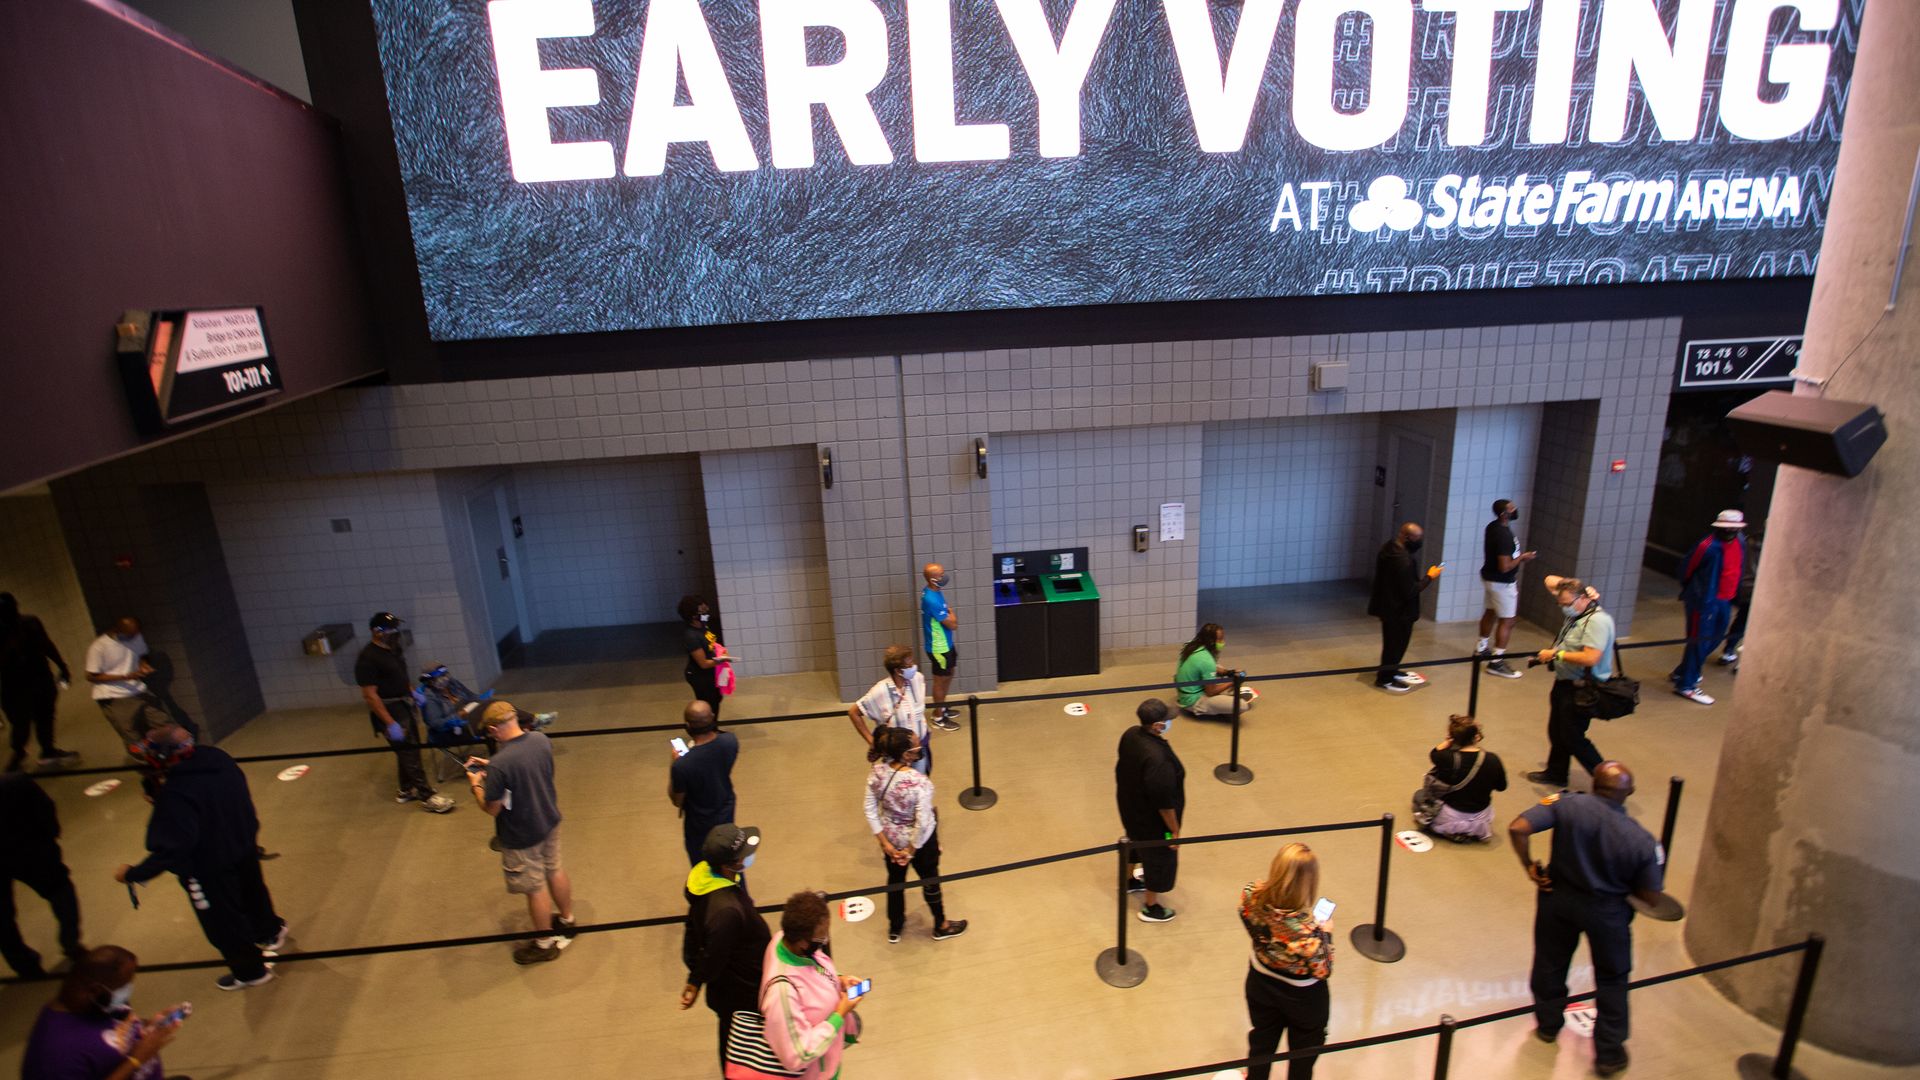 Voters line up inside of State Farm Arena, Georgia's largest early voting location, for the first day of early voting in the general election on October 12